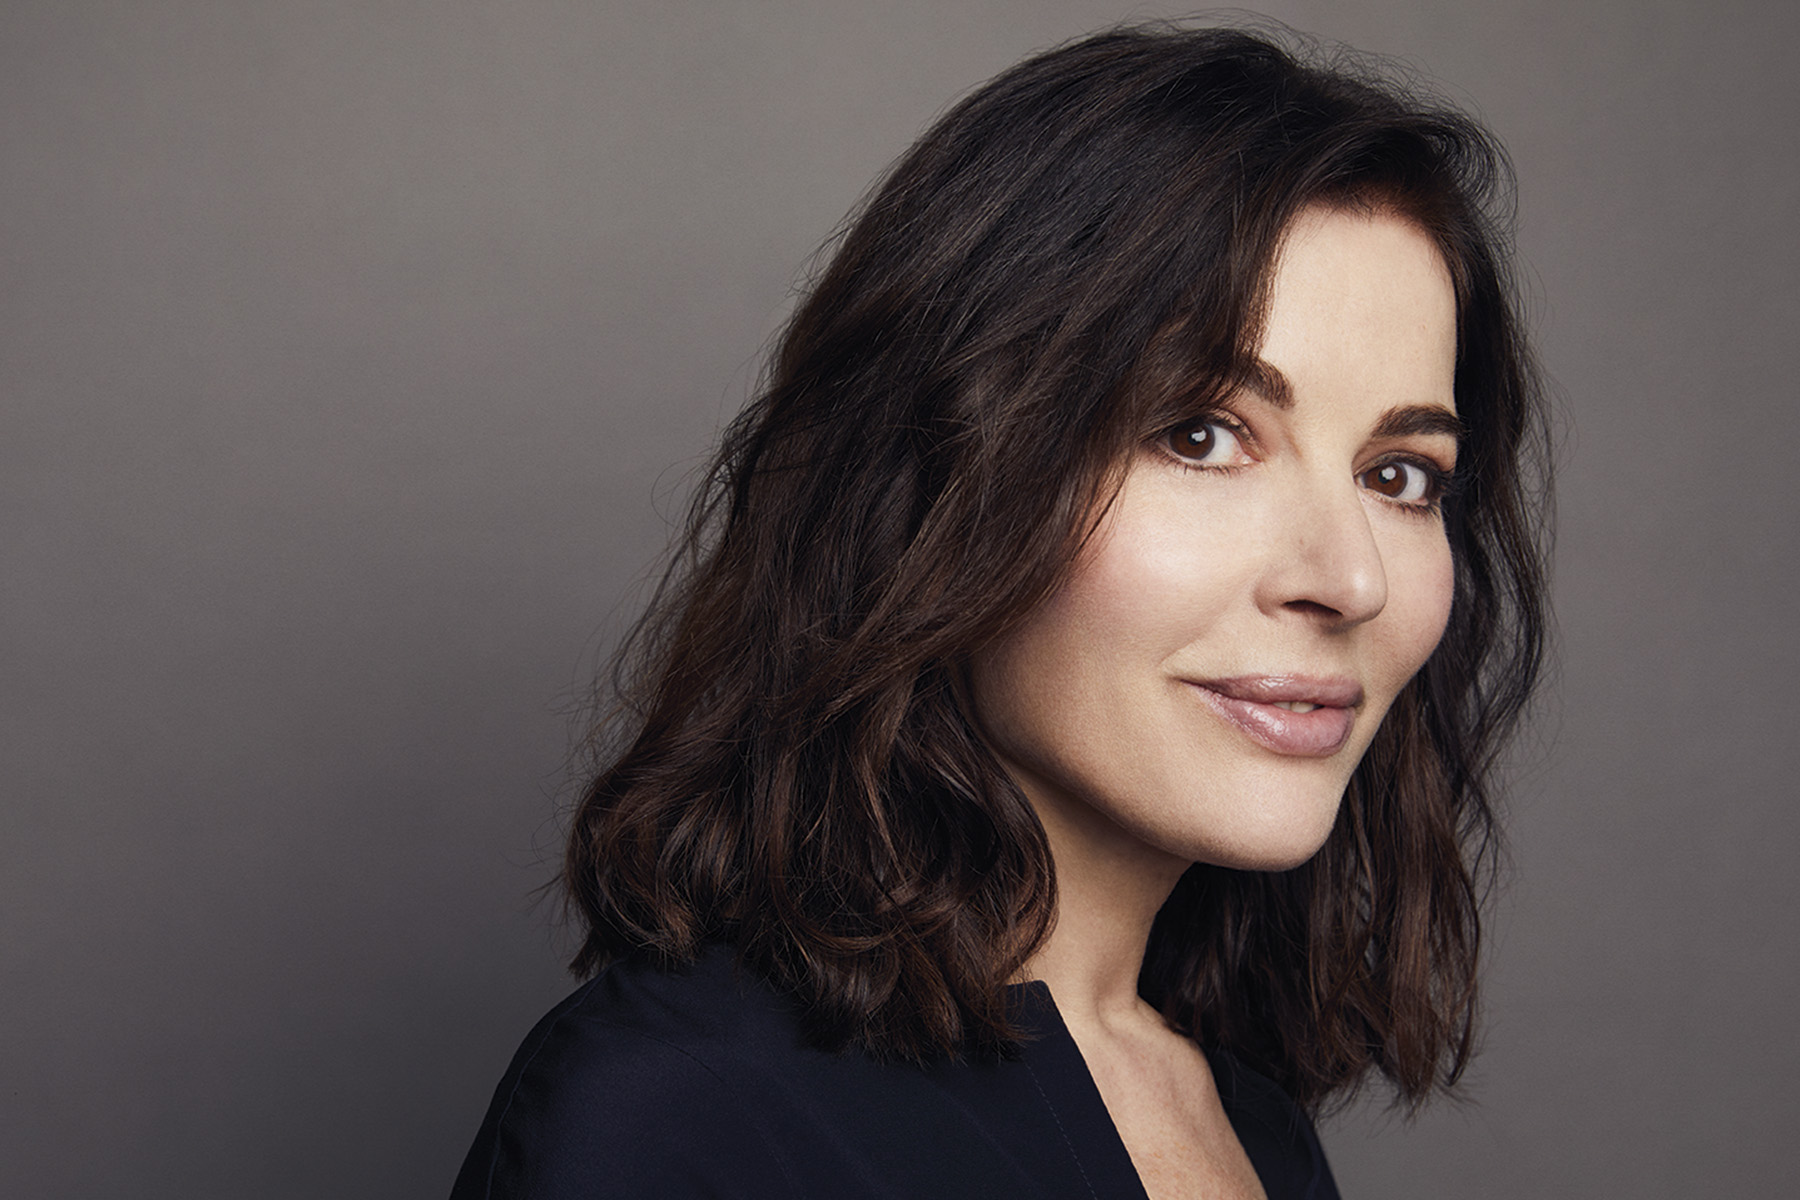 Head and shoulders photo of Nigella Lawson, wearing a black top and looking at the camera.